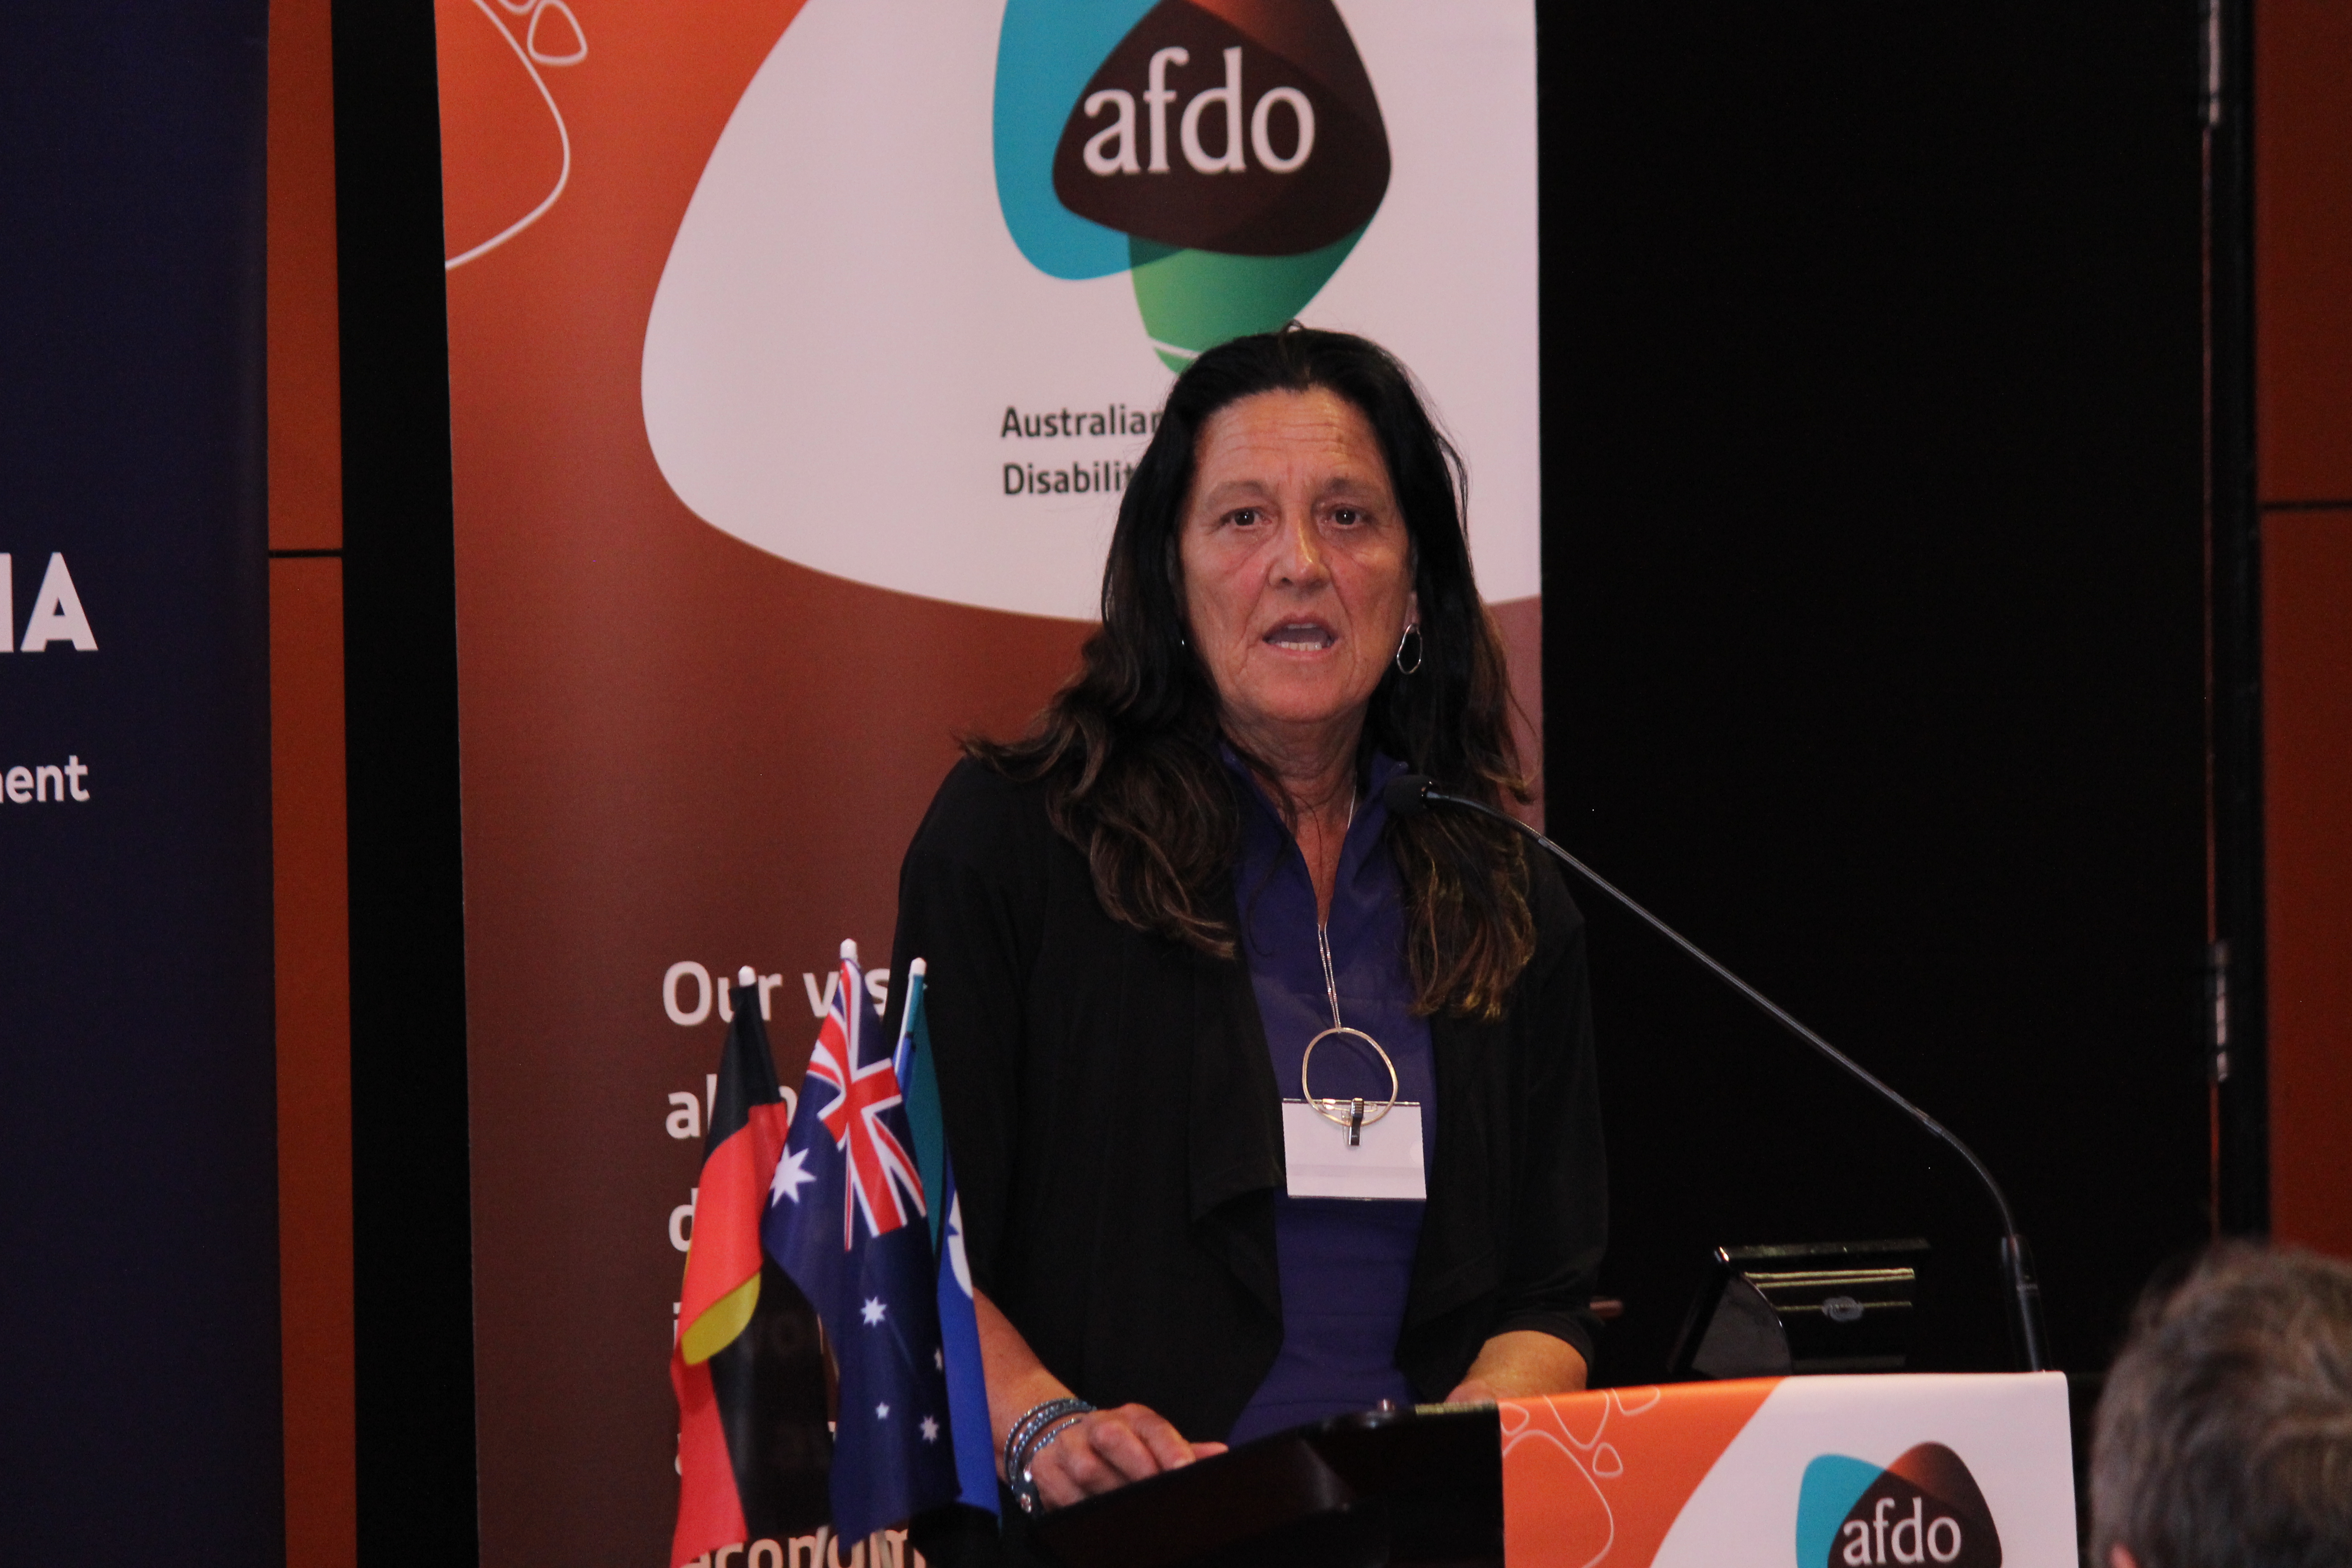 Christine Couzens MP standing at lectern, making a speech with AFDO banner in the background